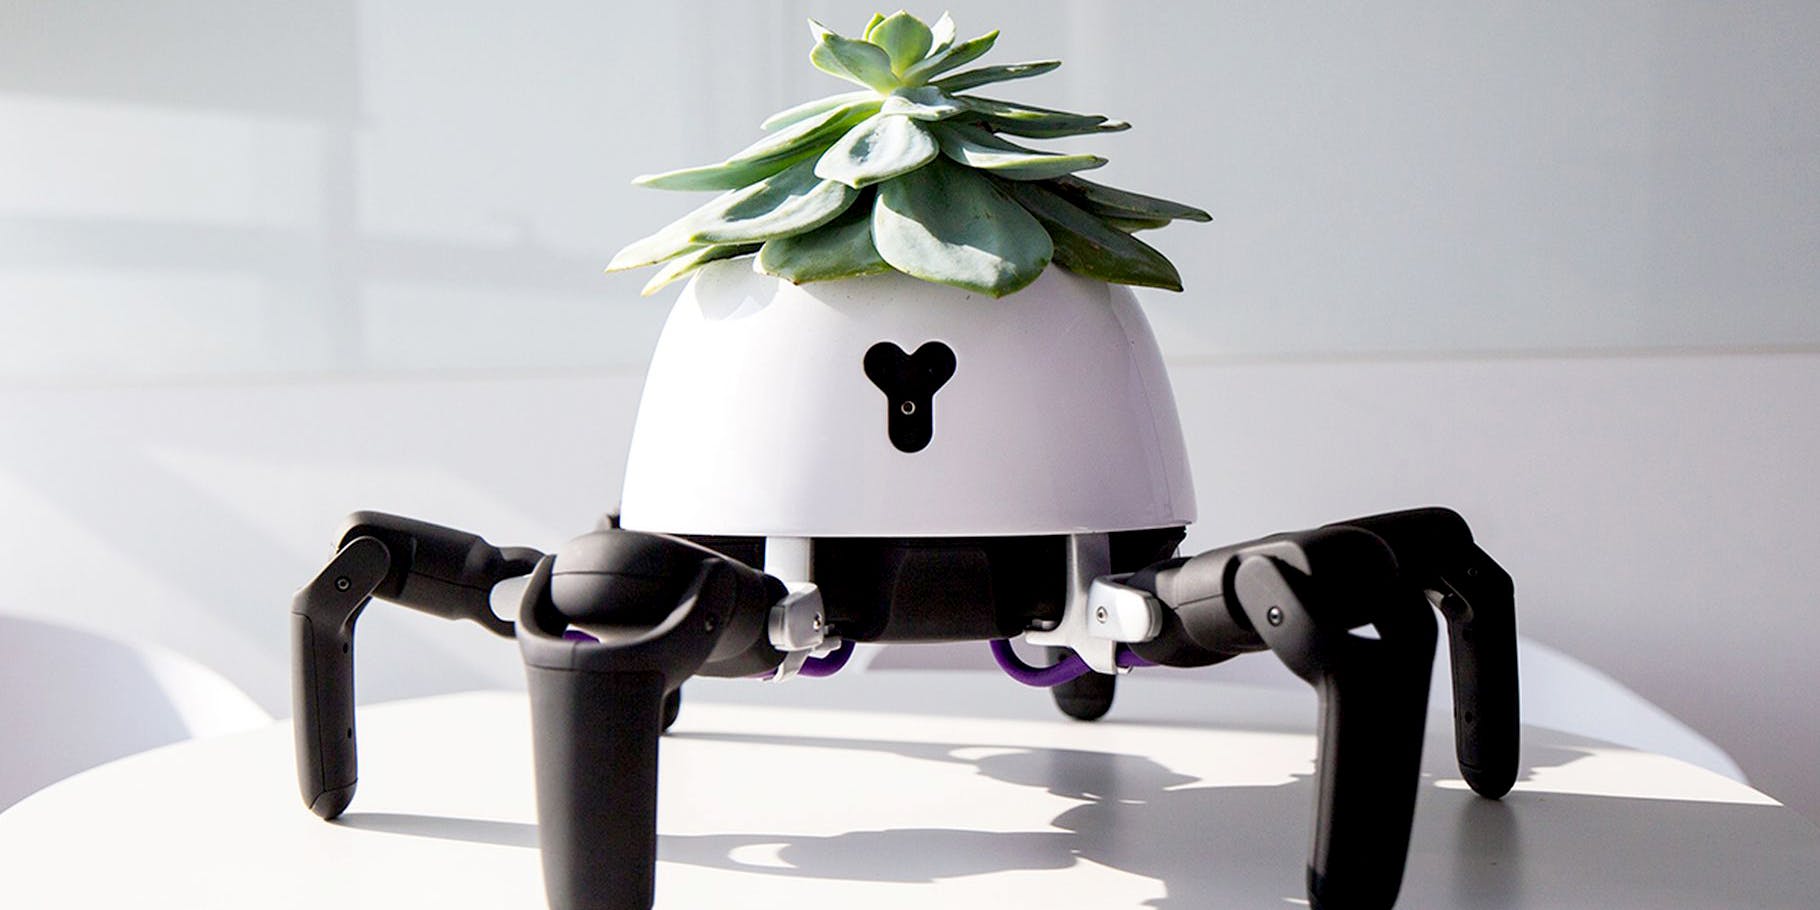 The World's Cutest Robot Will Move Your Plant In And Out Of The Sun